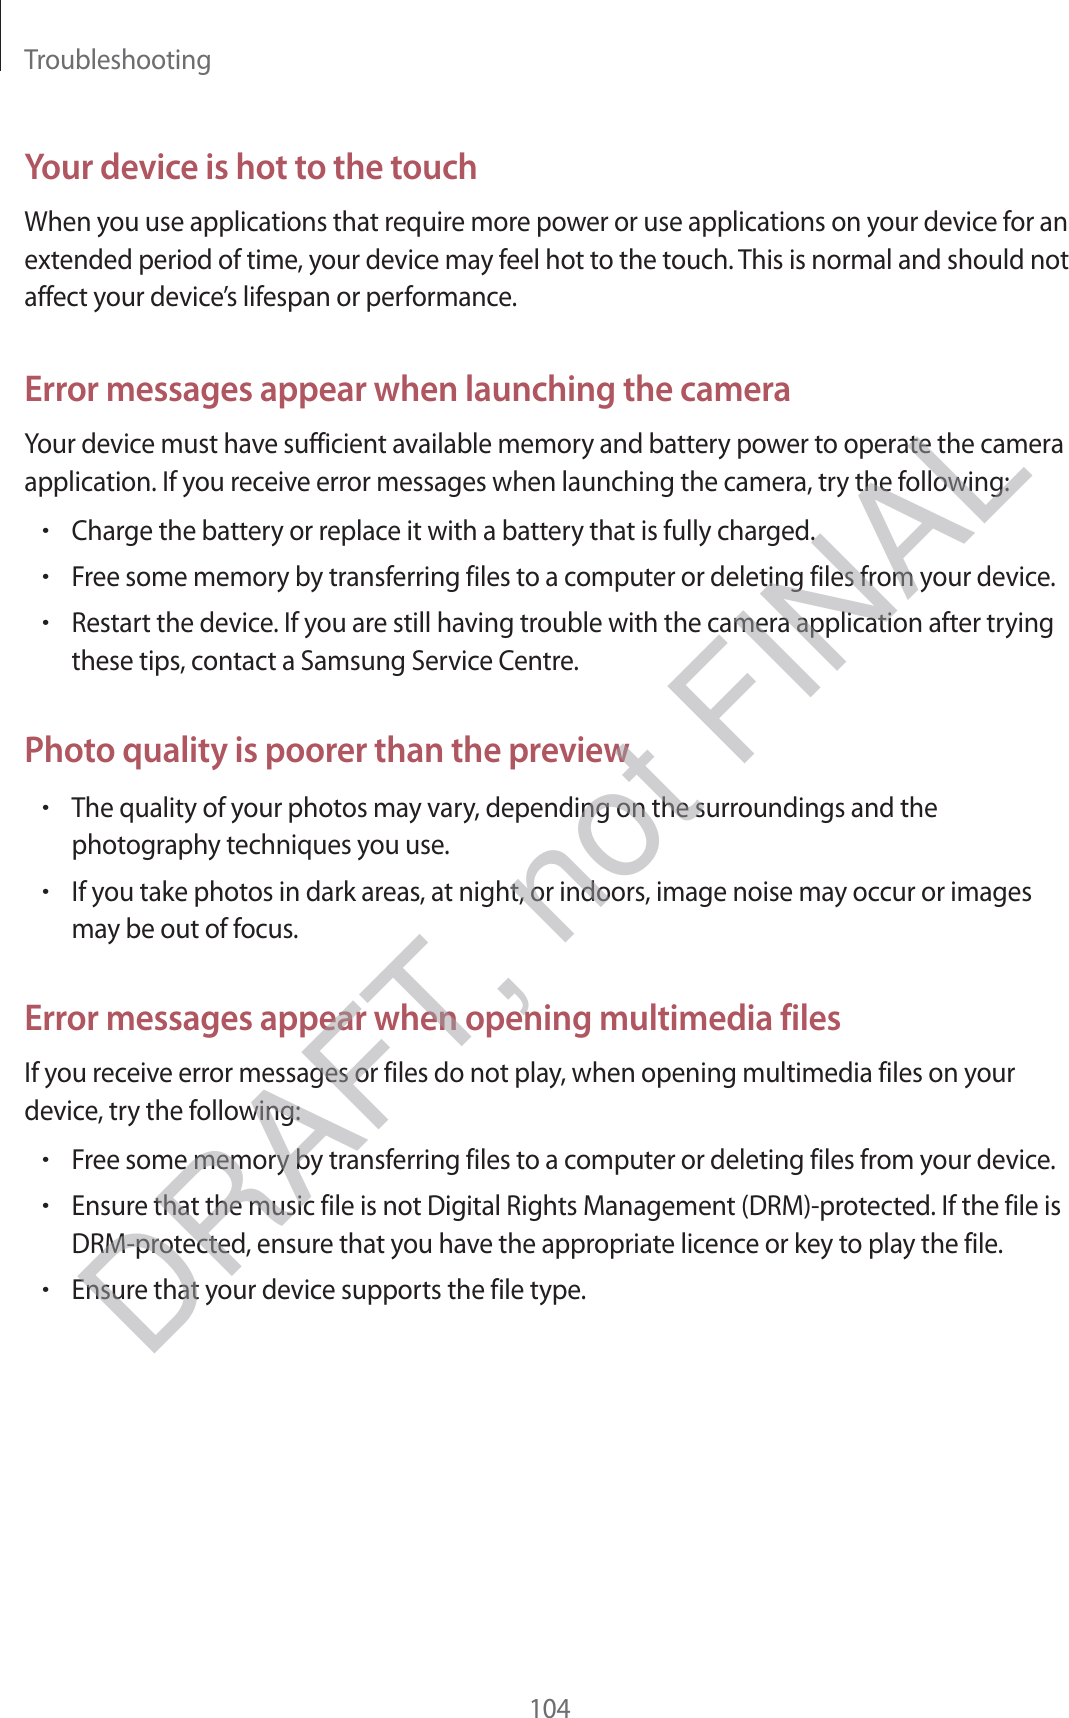 Troubleshooting104Your device is hot to the touchWhen you use applications that require more power or use applications on your device for an extended period of time, your device may feel hot to the touch. This is normal and should not affect your device’s lifespan or performance.Error messages appear when launching the cameraYour device must have sufficient available memory and battery power to operate the camera application. If you receive error messages when launching the camera, try the following:rCharge the battery or replace it with a battery that is fully charged.rFree some memory by transferring files to a computer or deleting files from your device.rRestart the device. If you are still having trouble with the camera application after trying these tips, contact a Samsung Service Centre.Photo quality is poorer than the previewrThe quality of your photos may vary, depending on the surroundings and the photography techniques you use.rIf you take photos in dark areas, at night, or indoors, image noise may occur or images may be out of focus.Error messages appear when opening multimedia filesIf you receive error messages or files do not play, when opening multimedia files on your device, try the following:rFree some memory by transferring files to a computer or deleting files from your device.rEnsure that the music file is not Digital Rights Management (DRM)-protected. If the file is DRM-protected, ensure that you have the appropriate licence or key to play the file.rEnsure that your device supports the file type.DRAFT, not FINAL